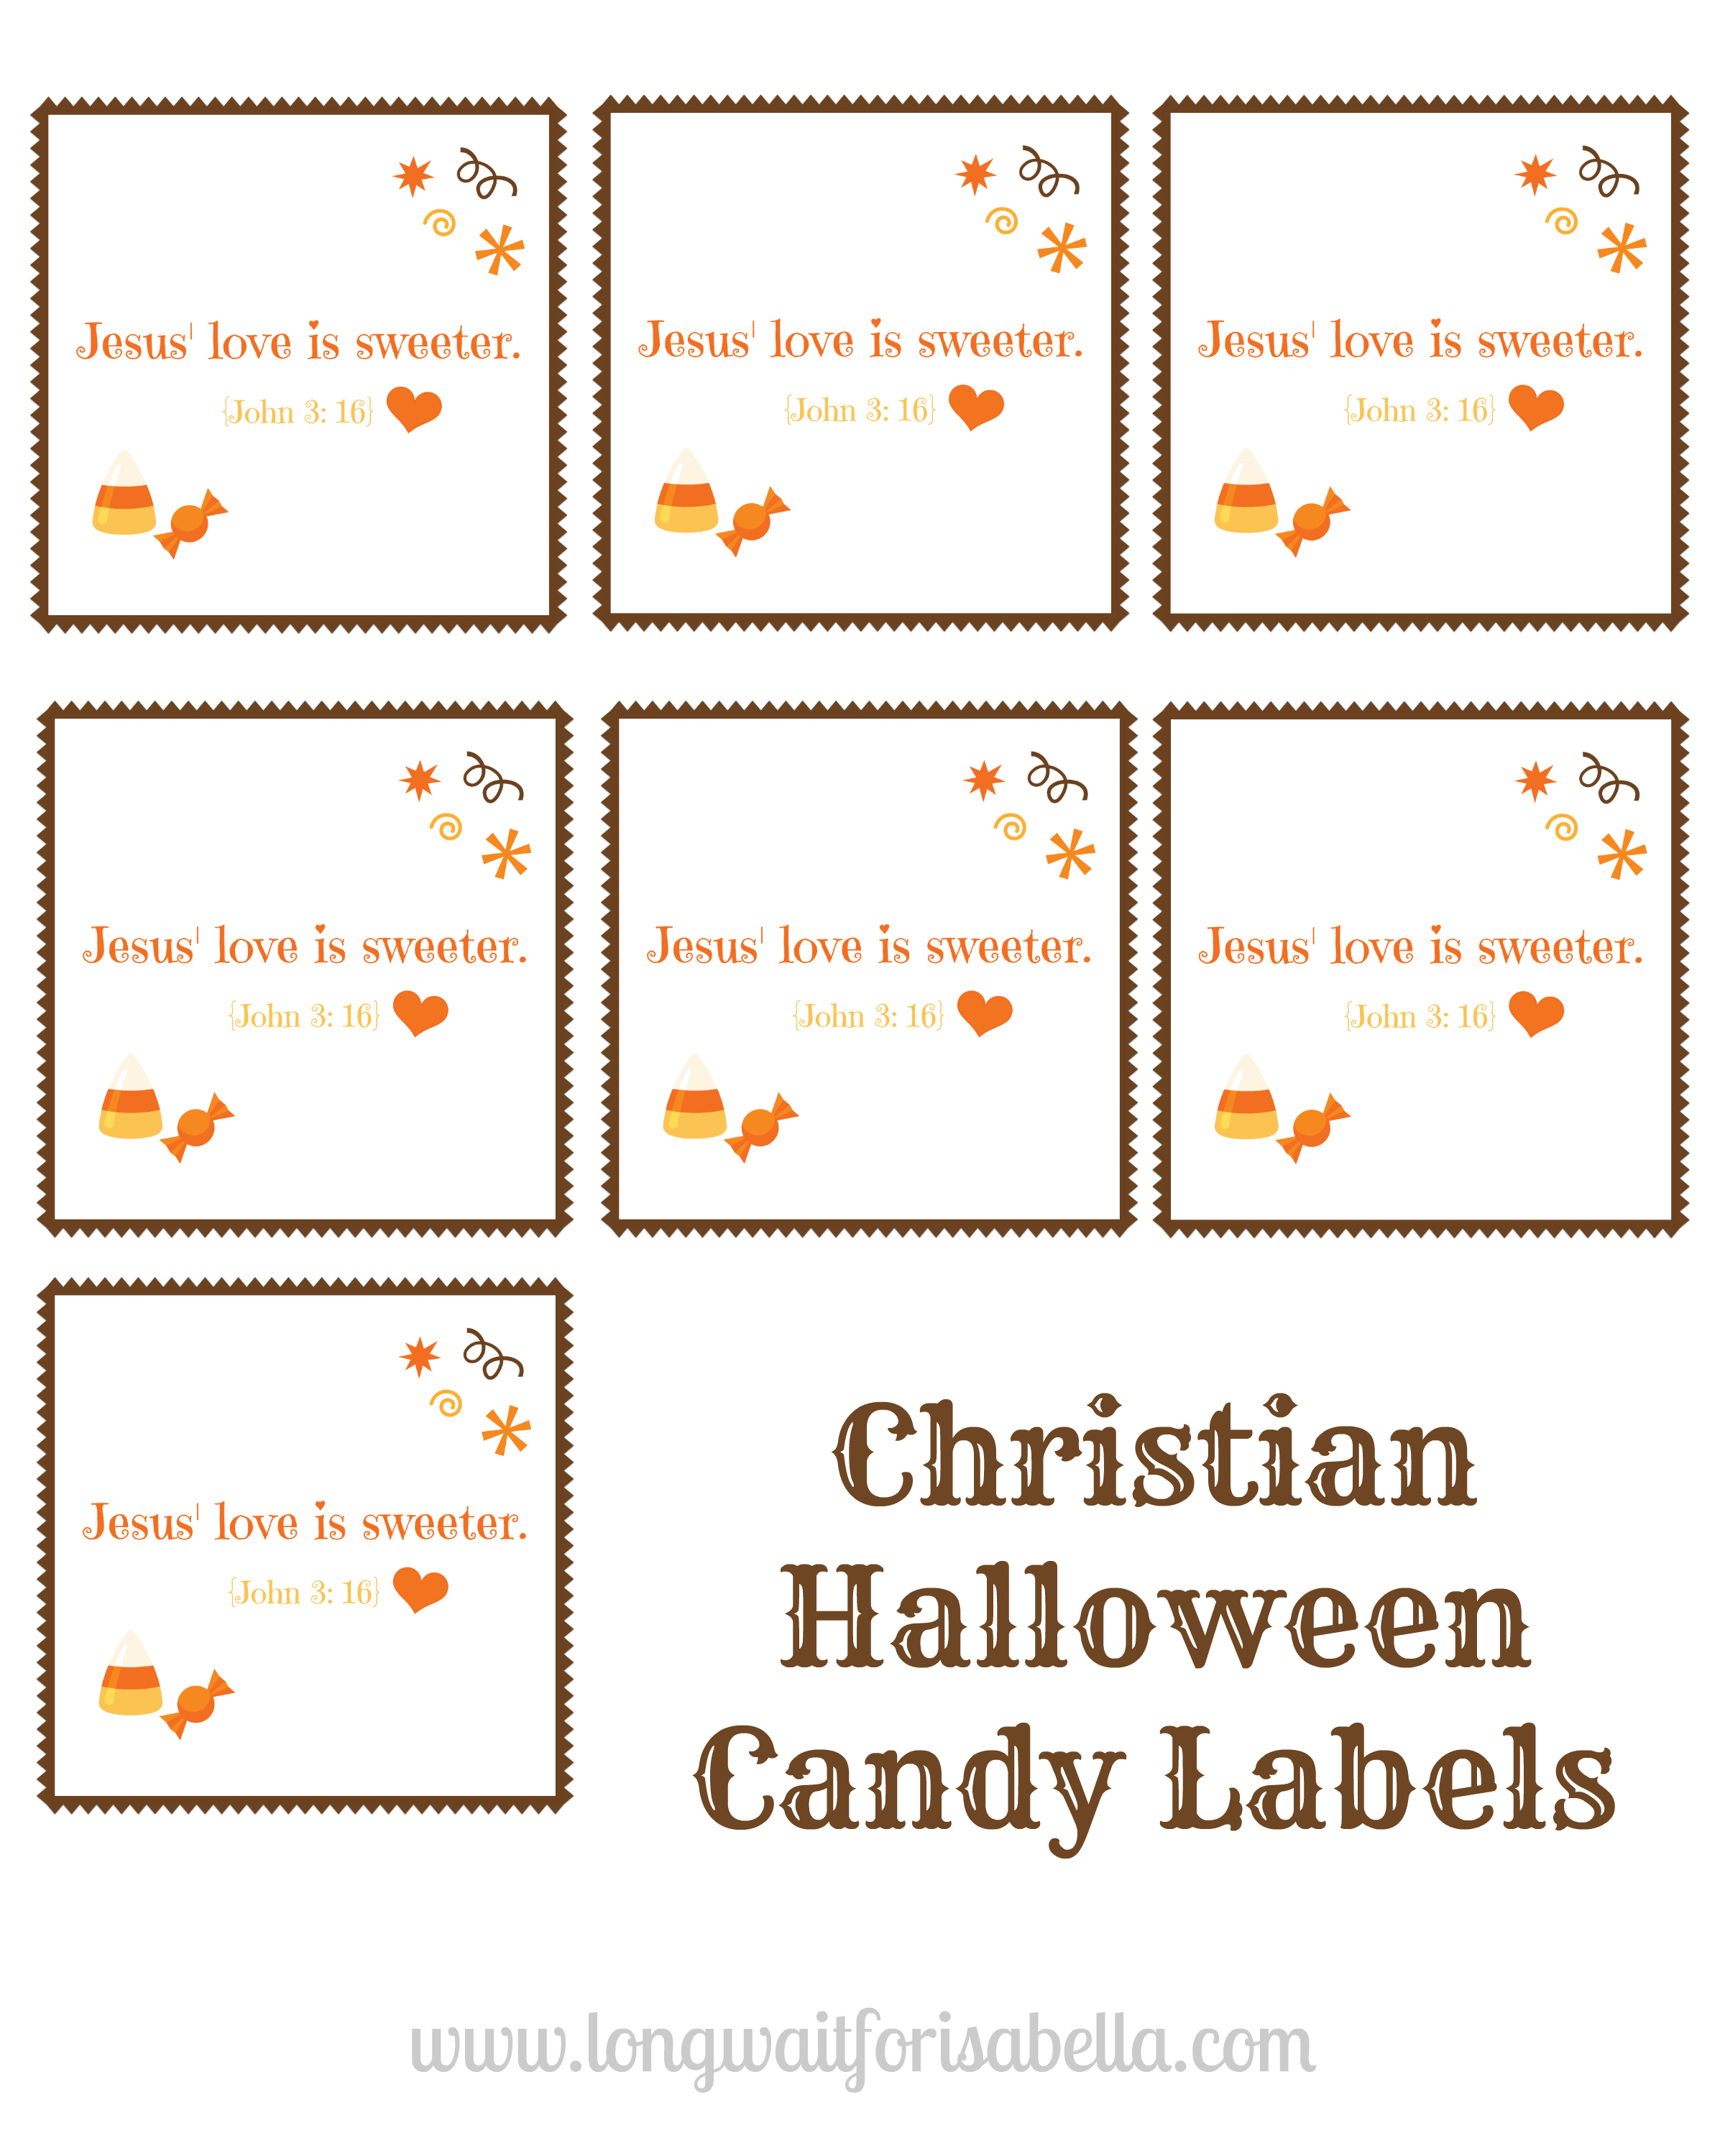 Print Out These Free Christian Halloween Candy Labels!